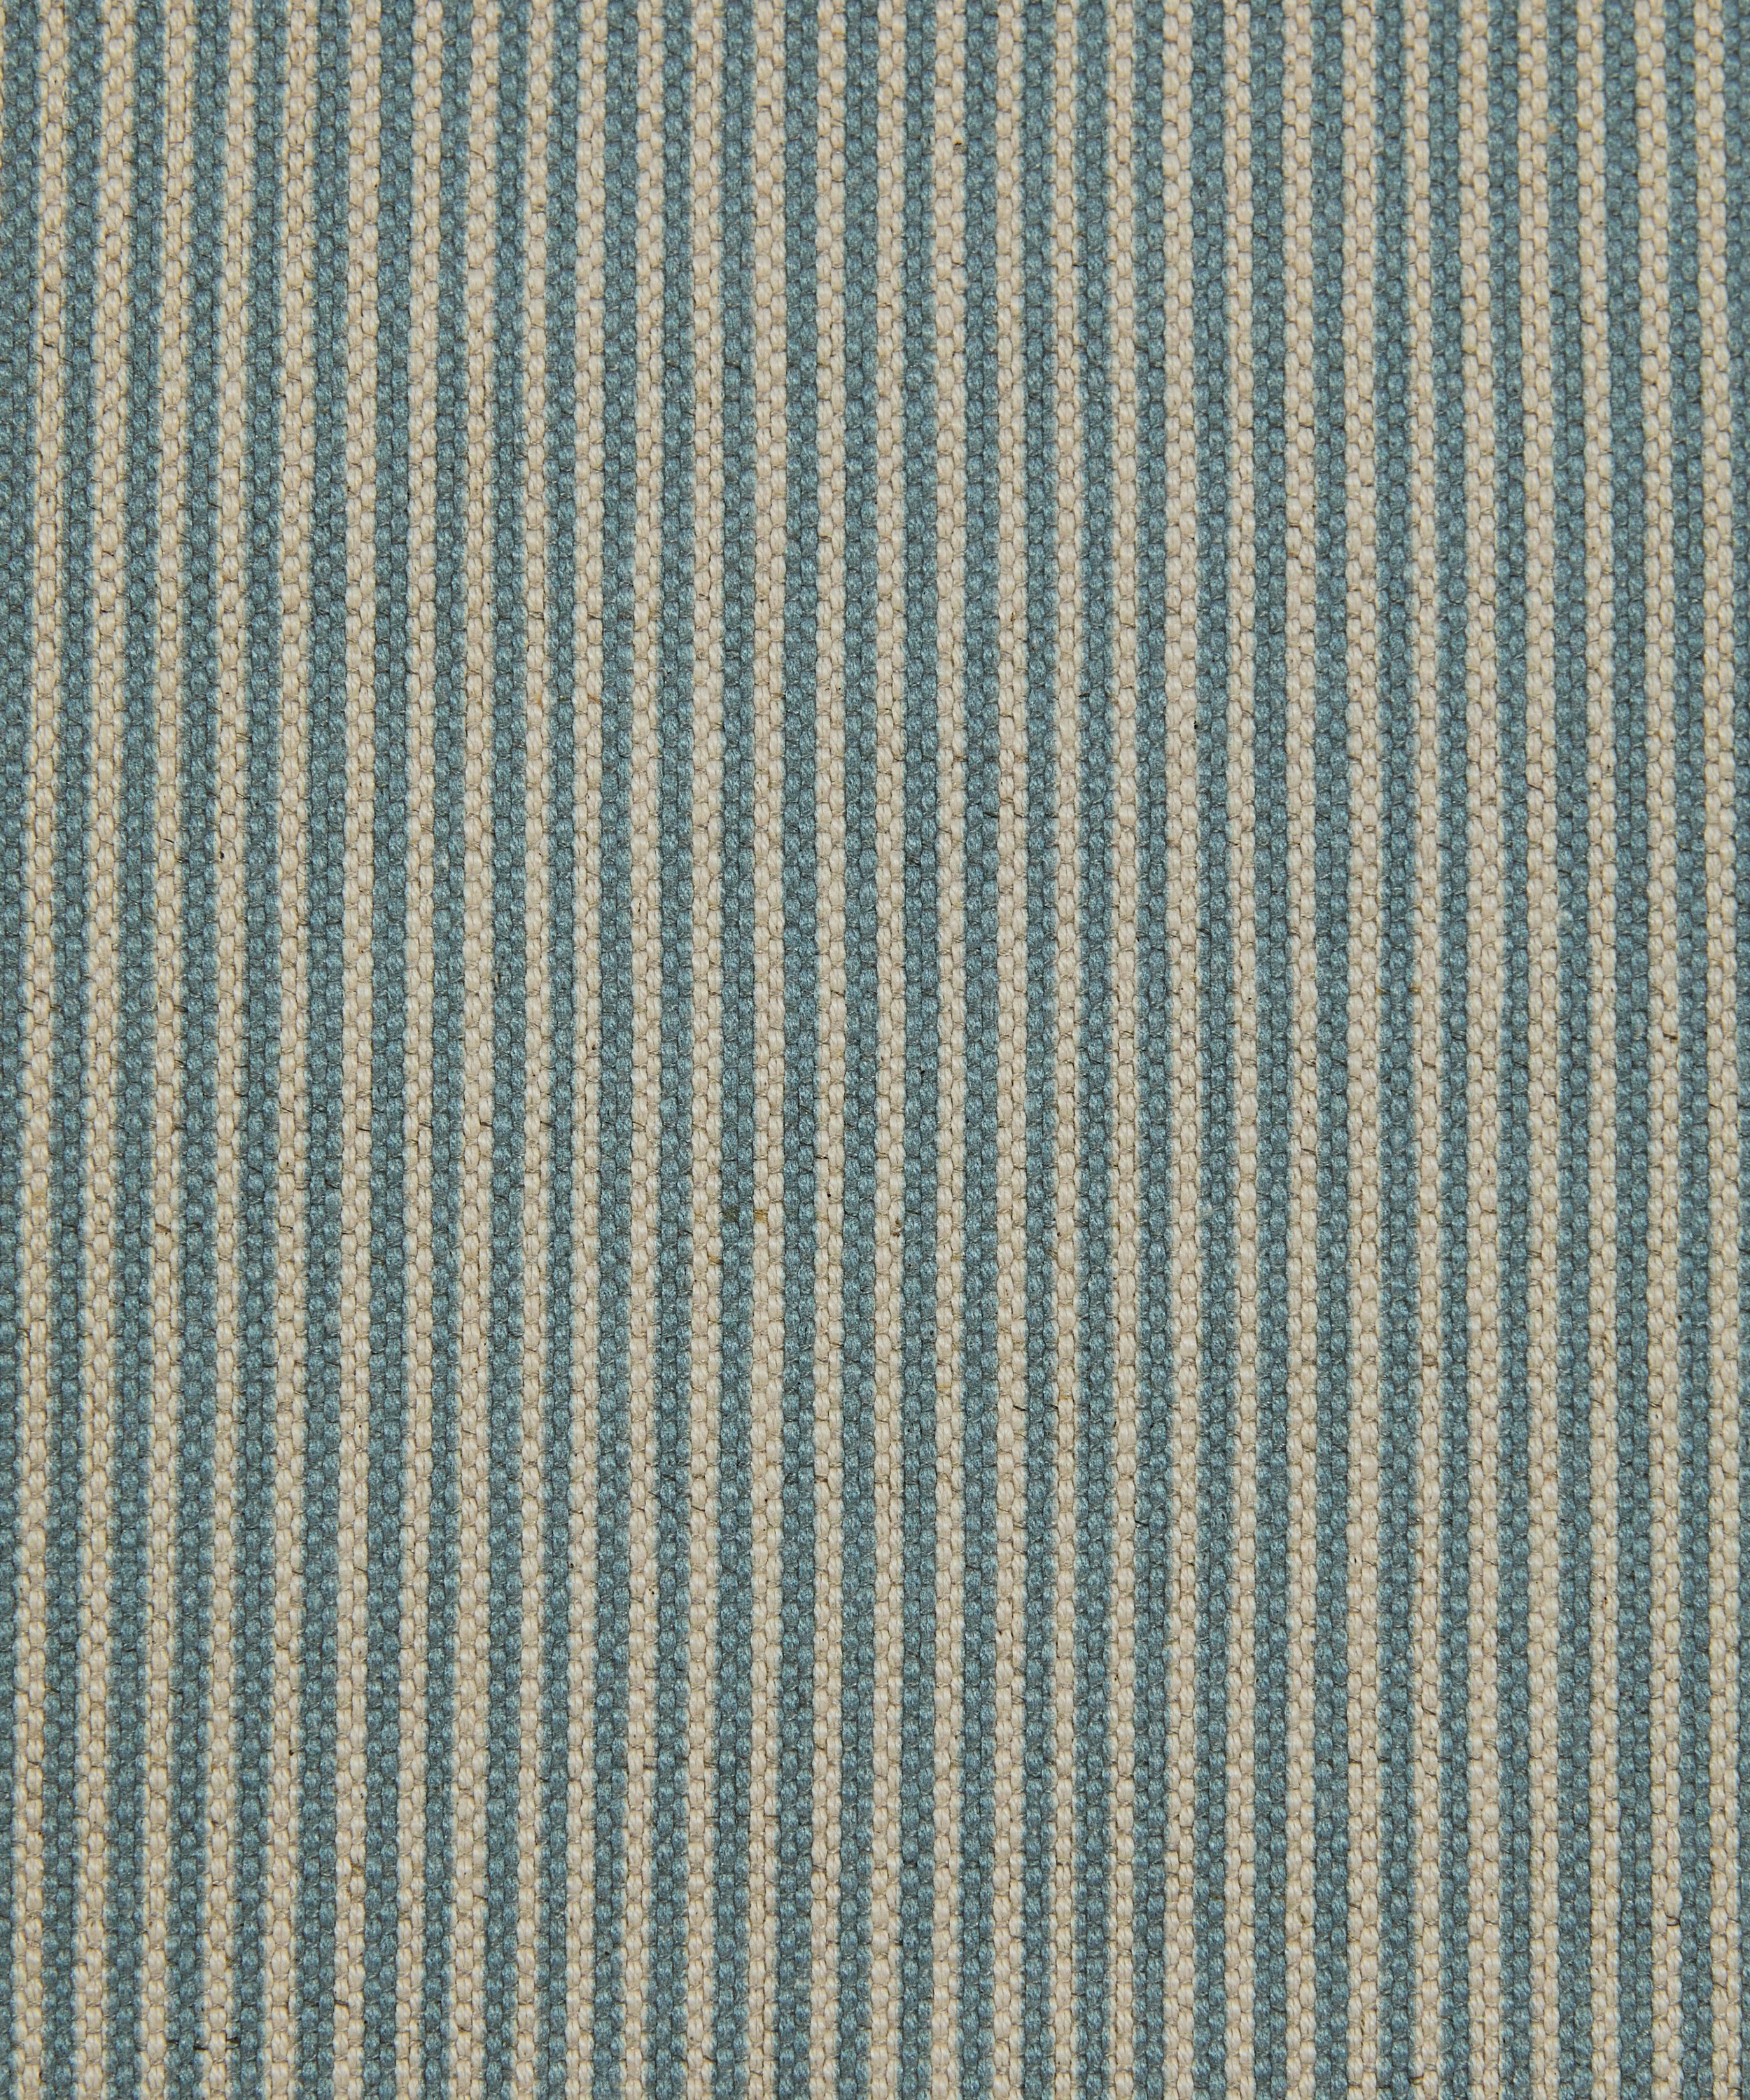 Liberty Interiors Shadow Stripe Weave in Piccadilly